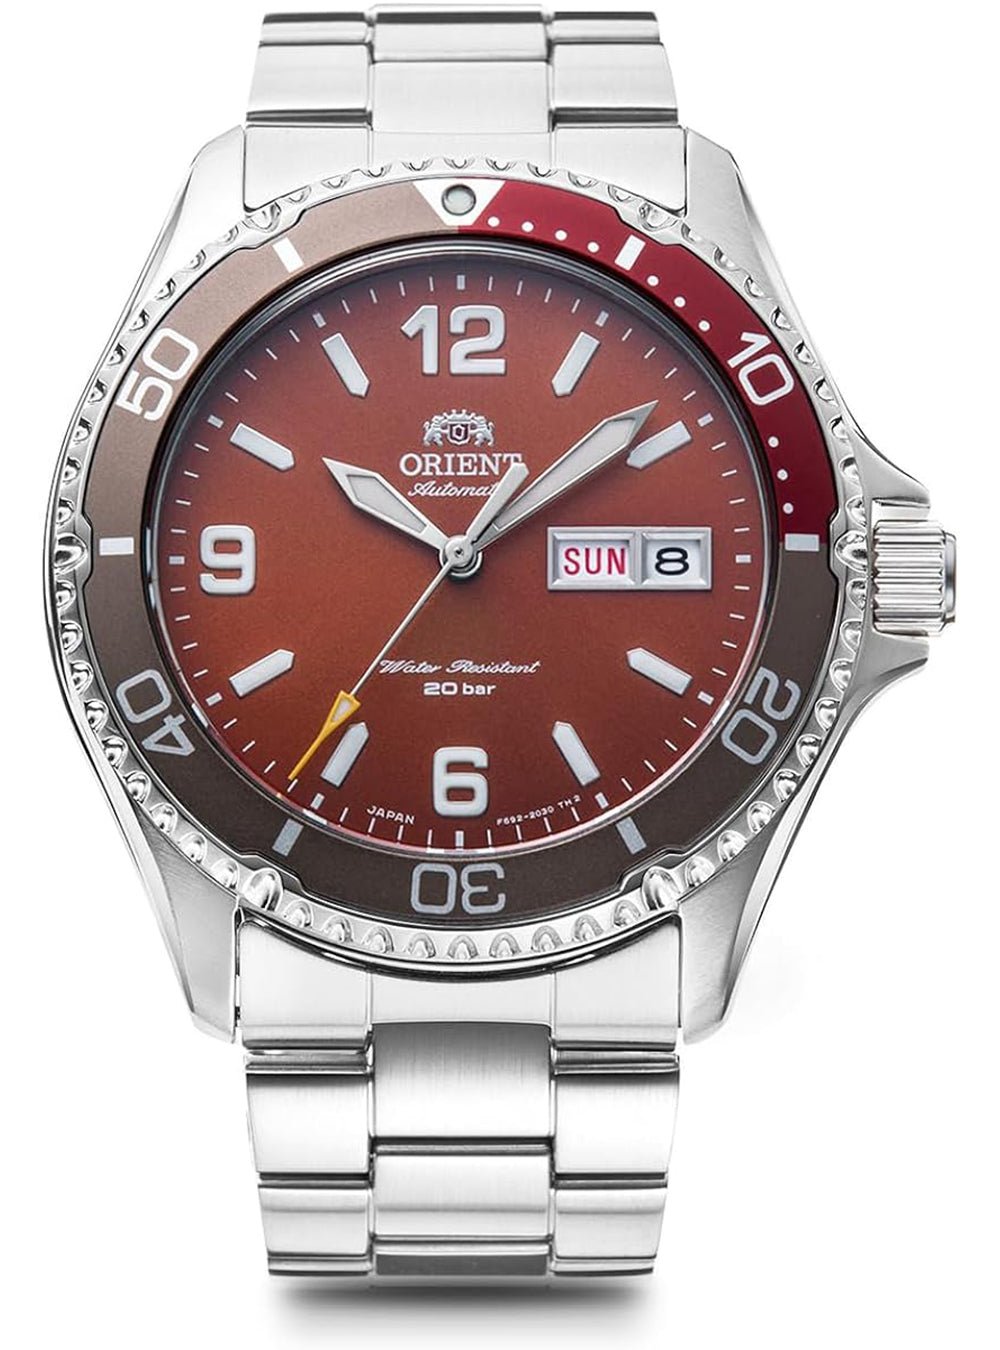 ORIENT MAKO SPORTS WATCH RN-AA0820R LIMITED EDITION MADE IN JAPAN JDMWRISTWATCHjapan-select